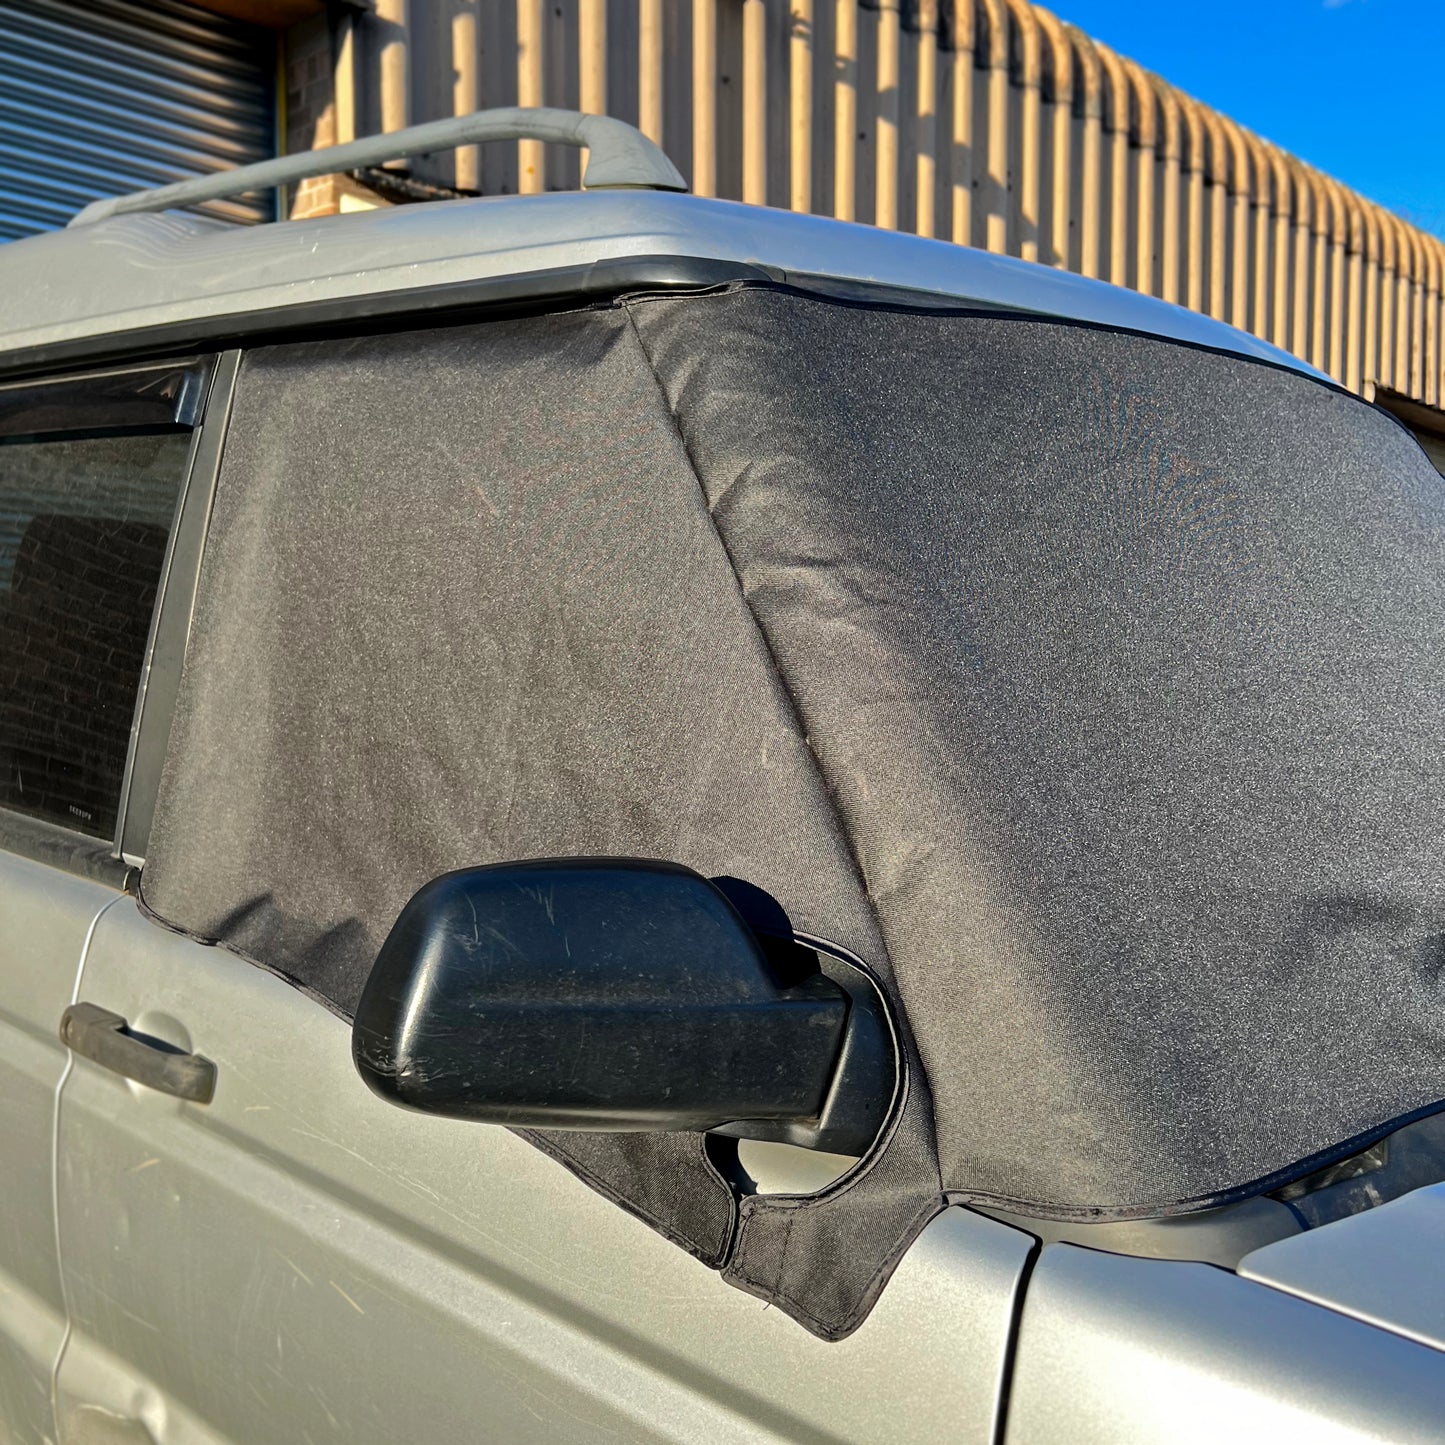 Land Rover Discovery 2 - Deluxe Screen Cover